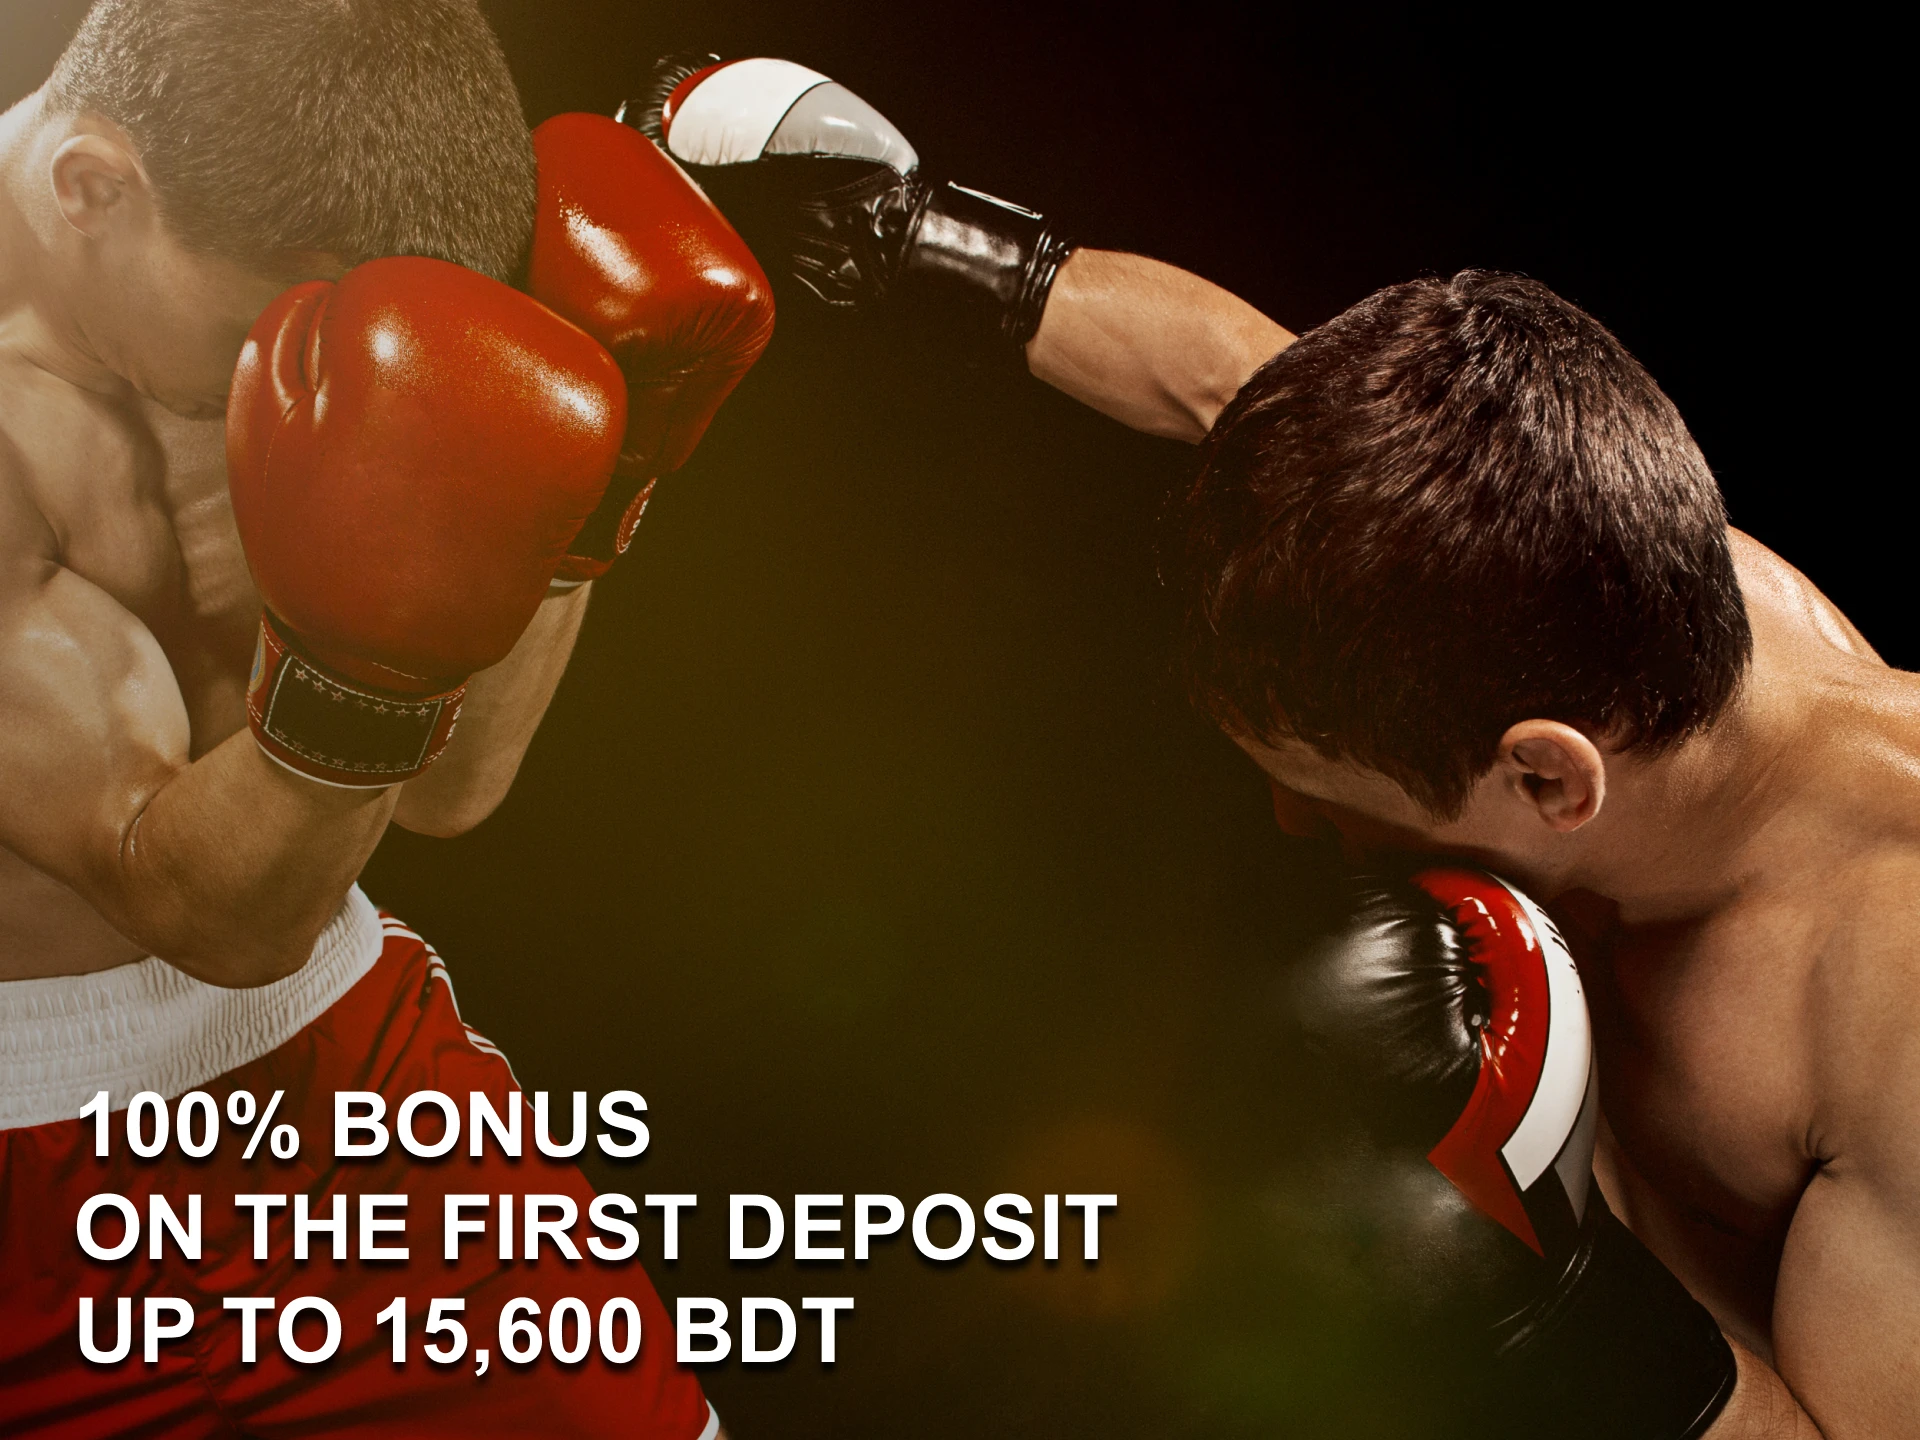 Make a deposit and get a welcome bonus on betting.